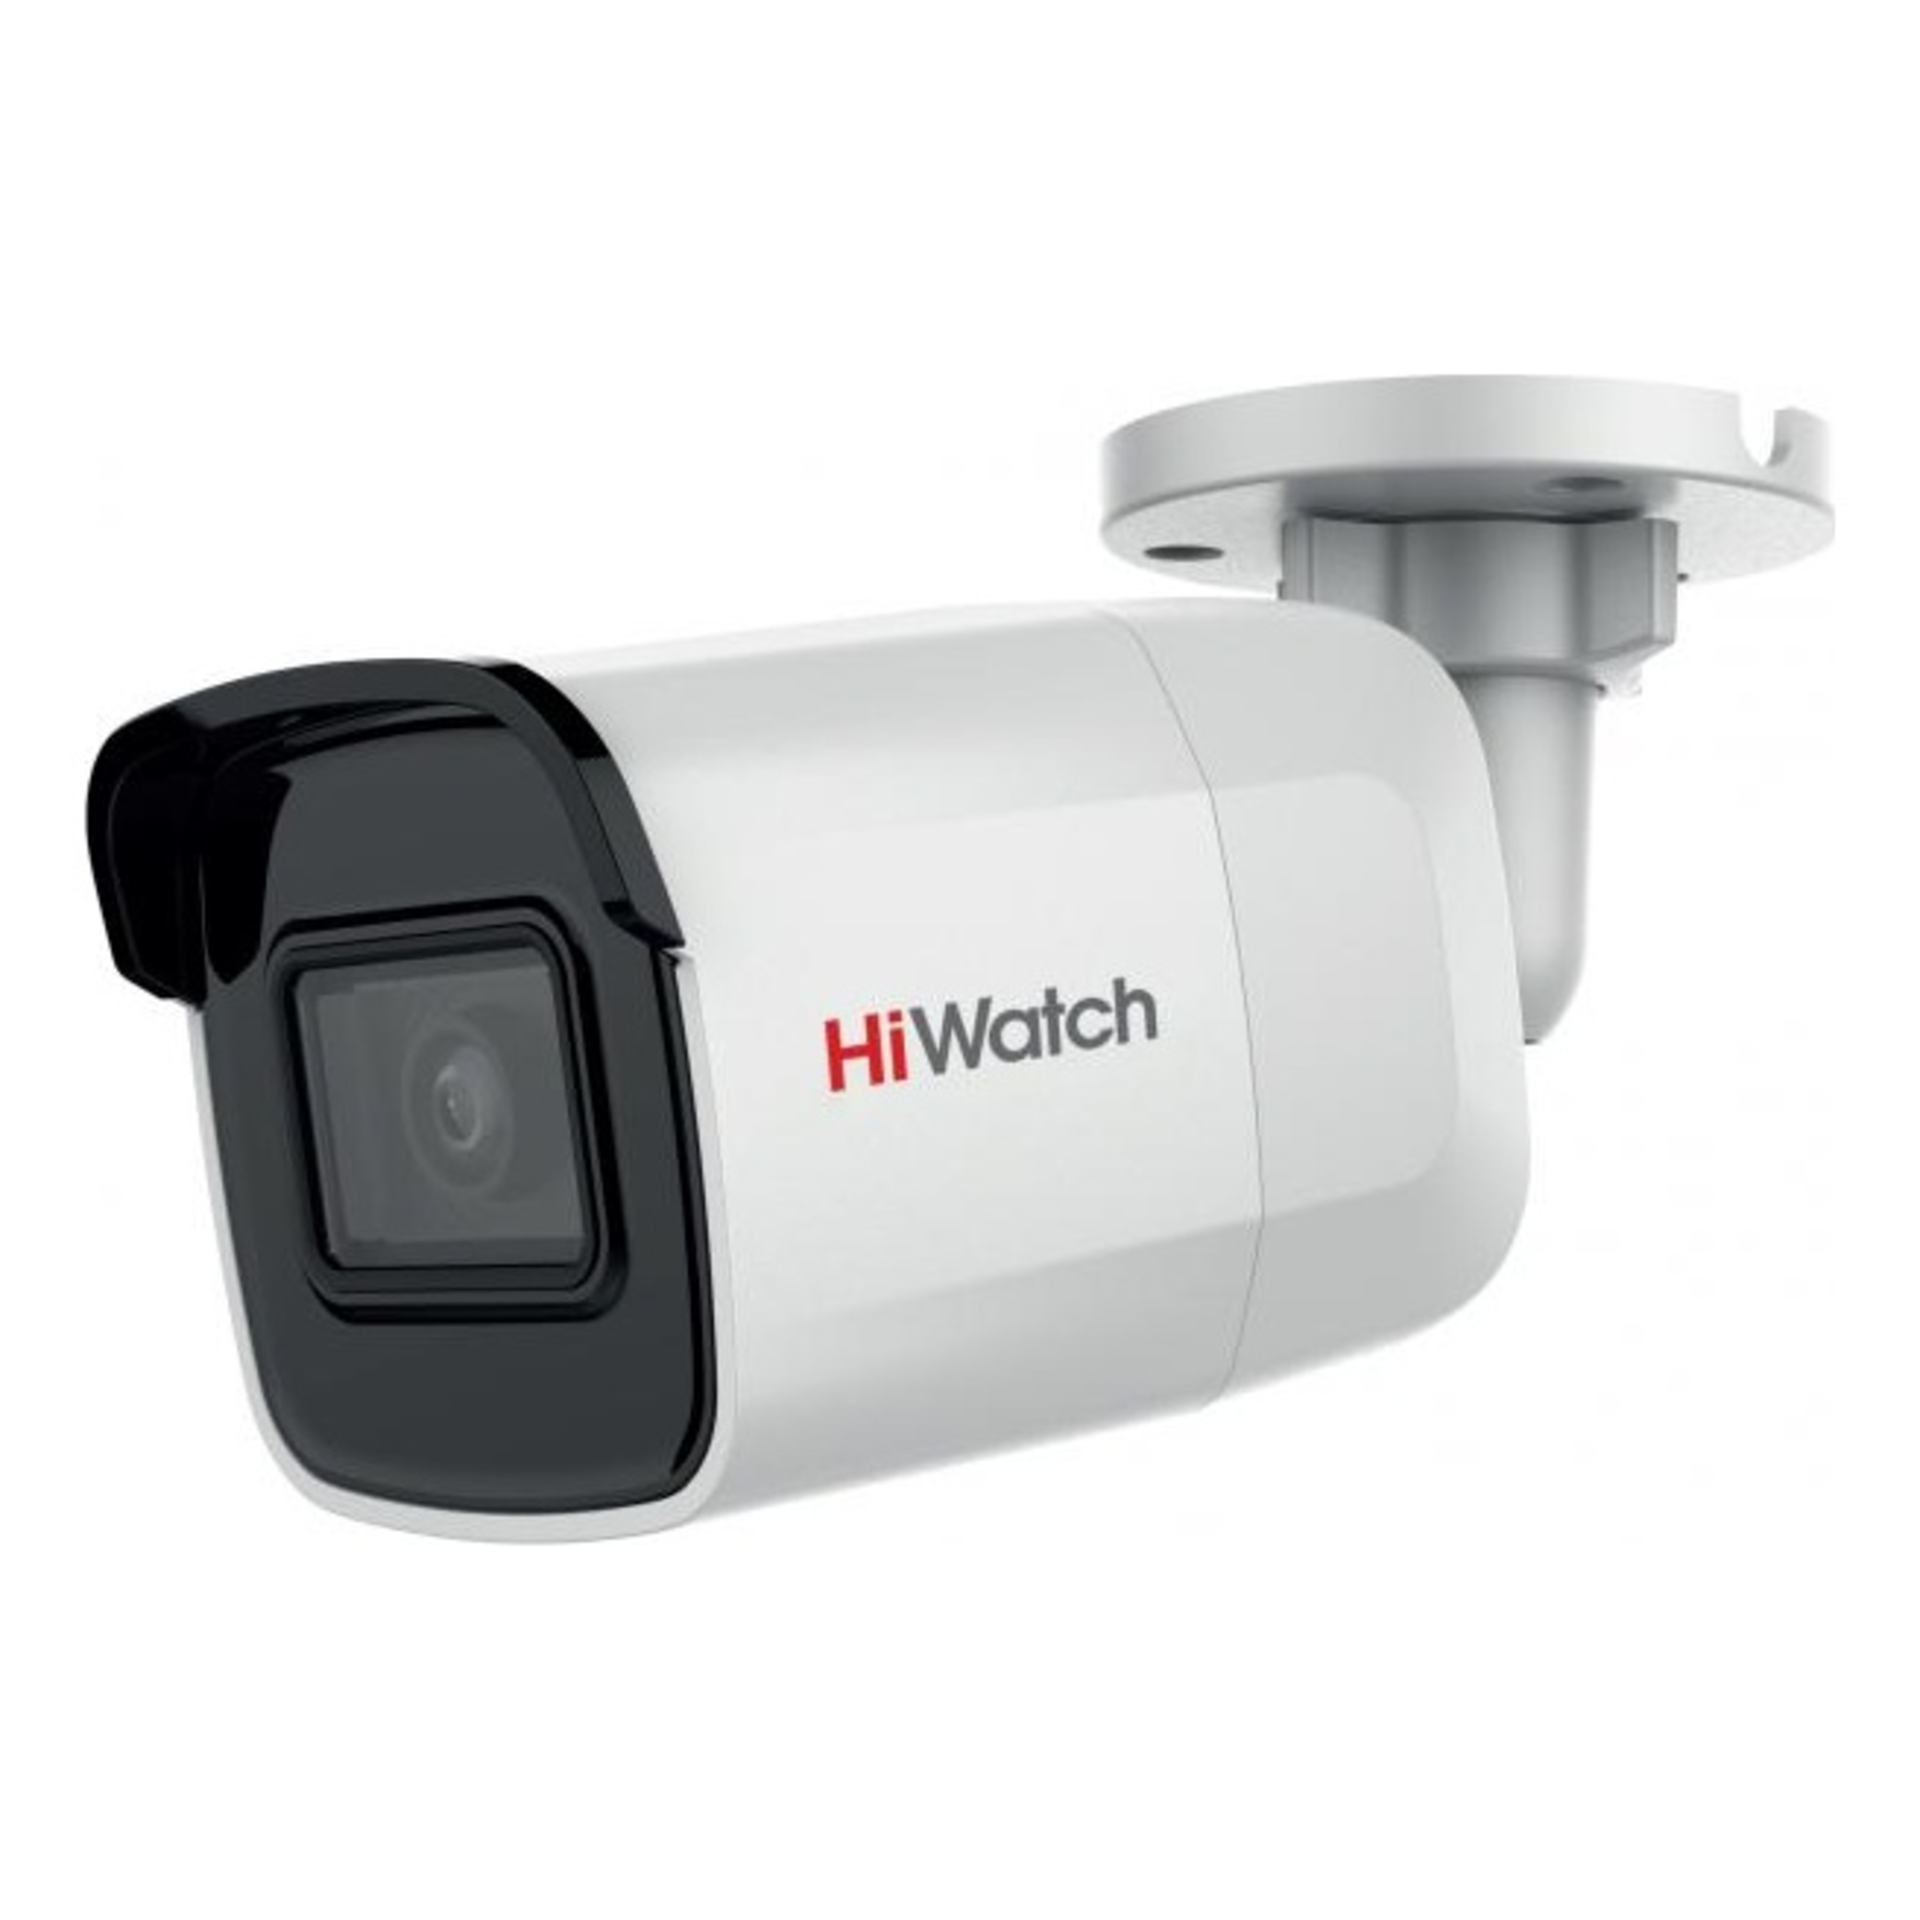 Hiwatch poe камера. Hikvision DS-2cd2023g0e-i(b)(2.8mm). DS-2cd2023g0e-i(b)(2.8мм). Hikvision DS-2cd2023g0-i 2.8мм. Hikvision DS-2cd2023g0-i (4mm).